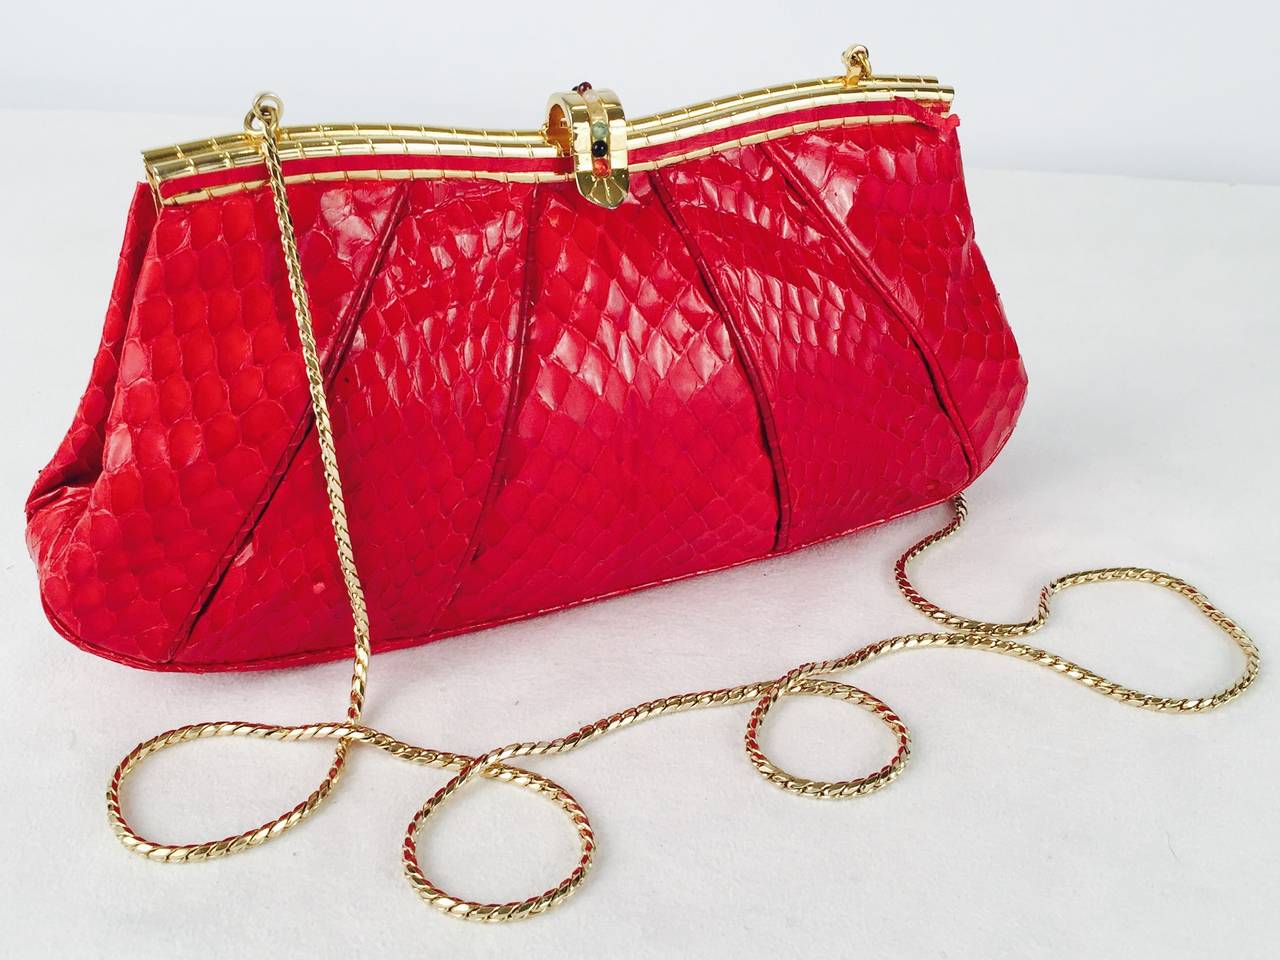 Judith Leiber Red Snakeskin Evening Bag is highly desired by all collectors of Judith Leiber! Features butter-soft snakeskin and easily converts from clutch to shoulder bag with minimal effort!  Gathered design accommodates more items as necessary.